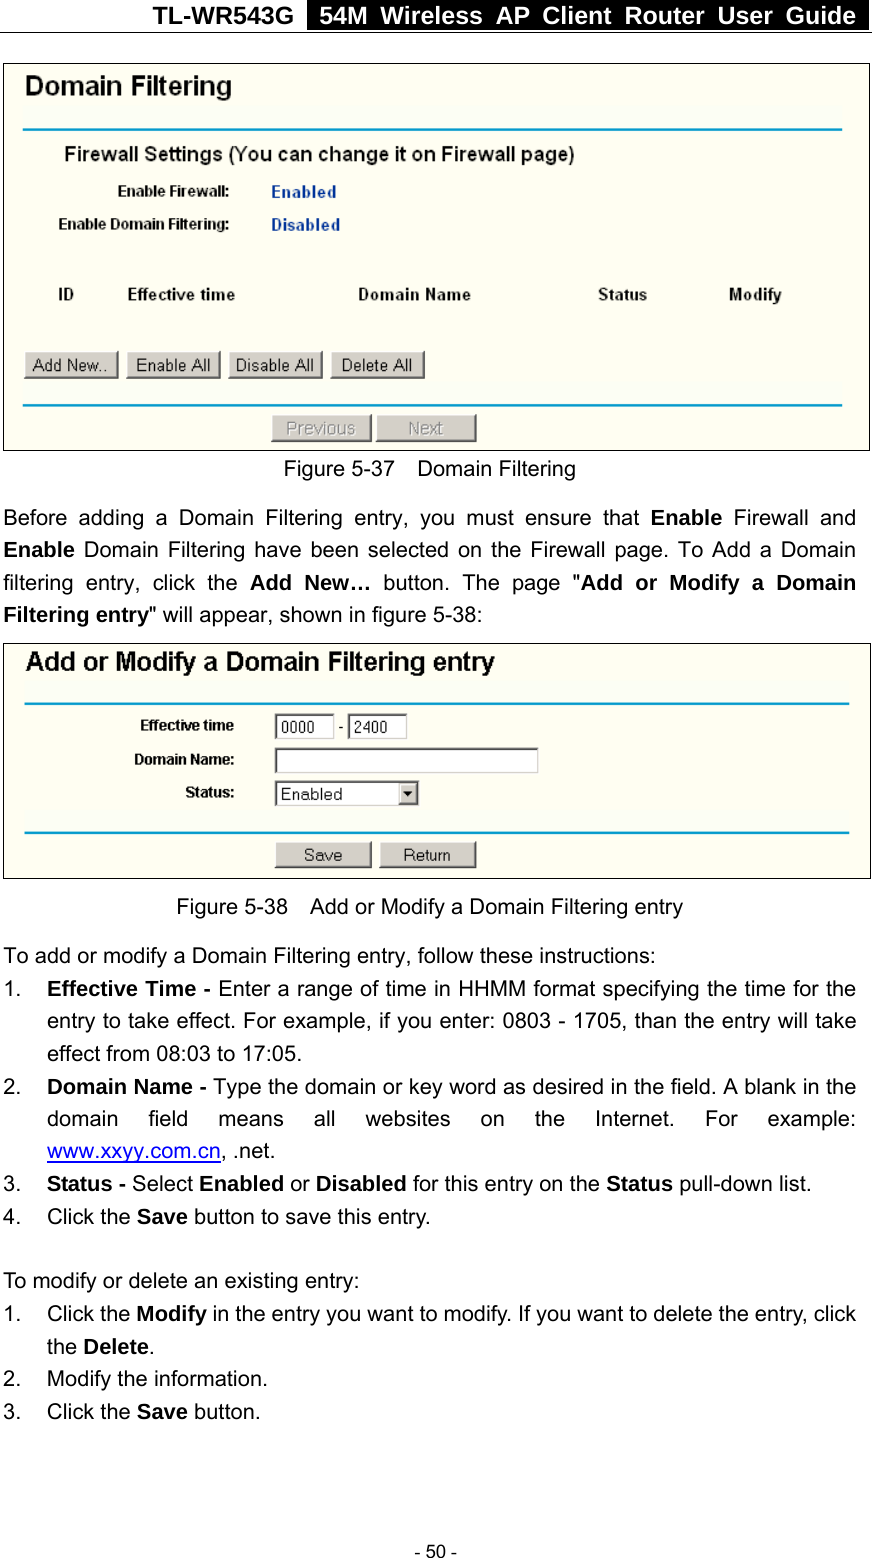 TL-WR543G   54M Wireless AP Client Router User Guide   Figure 5-37  Domain Filtering Before adding a Domain Filtering entry, you must ensure that Enable Firewall and Enable Domain Filtering have been selected on the Firewall page. To Add a Domain filtering entry, click the Add New… button. The page &quot;Add or Modify a Domain Filtering entry&quot; will appear, shown in figure 5-38:  Figure 5-38    Add or Modify a Domain Filtering entry To add or modify a Domain Filtering entry, follow these instructions: 1.  Effective Time - Enter a range of time in HHMM format specifying the time for the entry to take effect. For example, if you enter: 0803 - 1705, than the entry will take effect from 08:03 to 17:05. 2.  Domain Name - Type the domain or key word as desired in the field. A blank in the domain field means all websites on the Internet. For example: www.xxyy.com.cn, .net. 3.  Status - Select Enabled or Disabled for this entry on the Status pull-down list. 4. Click the Save button to save this entry.  To modify or delete an existing entry: 1. Click the Modify in the entry you want to modify. If you want to delete the entry, click the Delete. 2.  Modify the information.   3. Click the Save button.   - 50 - 